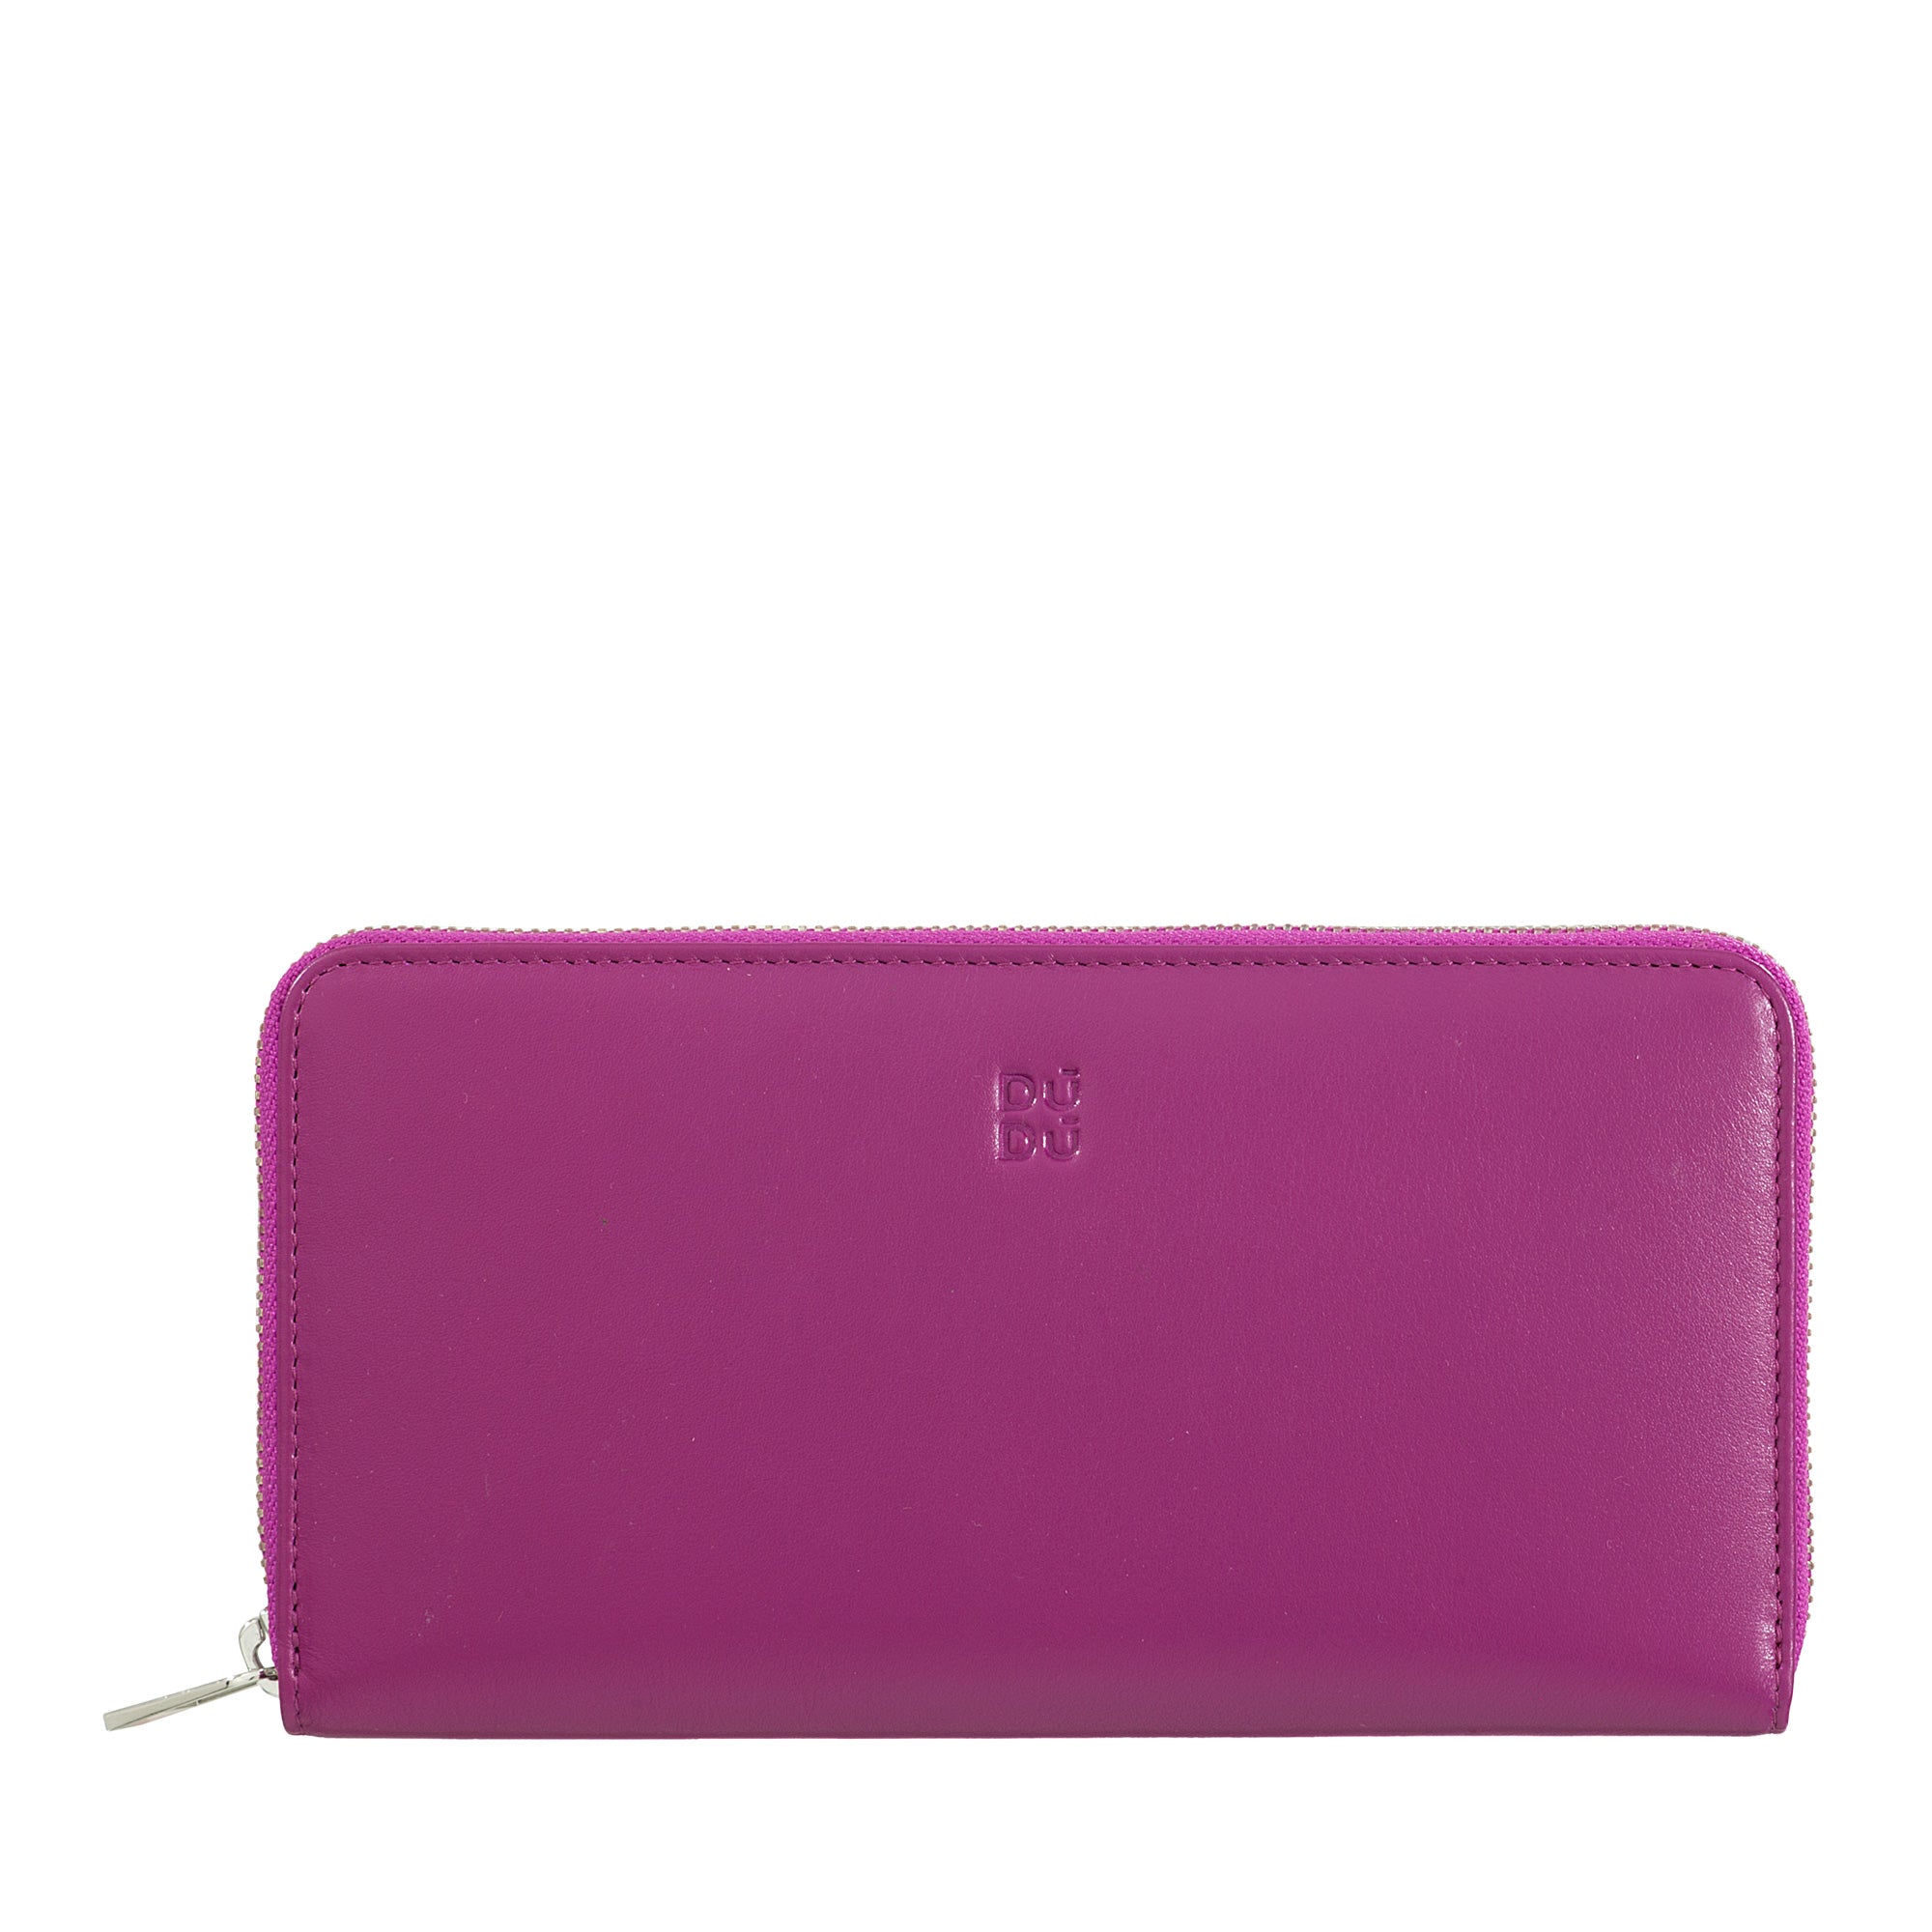 DuDu Colorful Ustica Wallet - Artisia Store